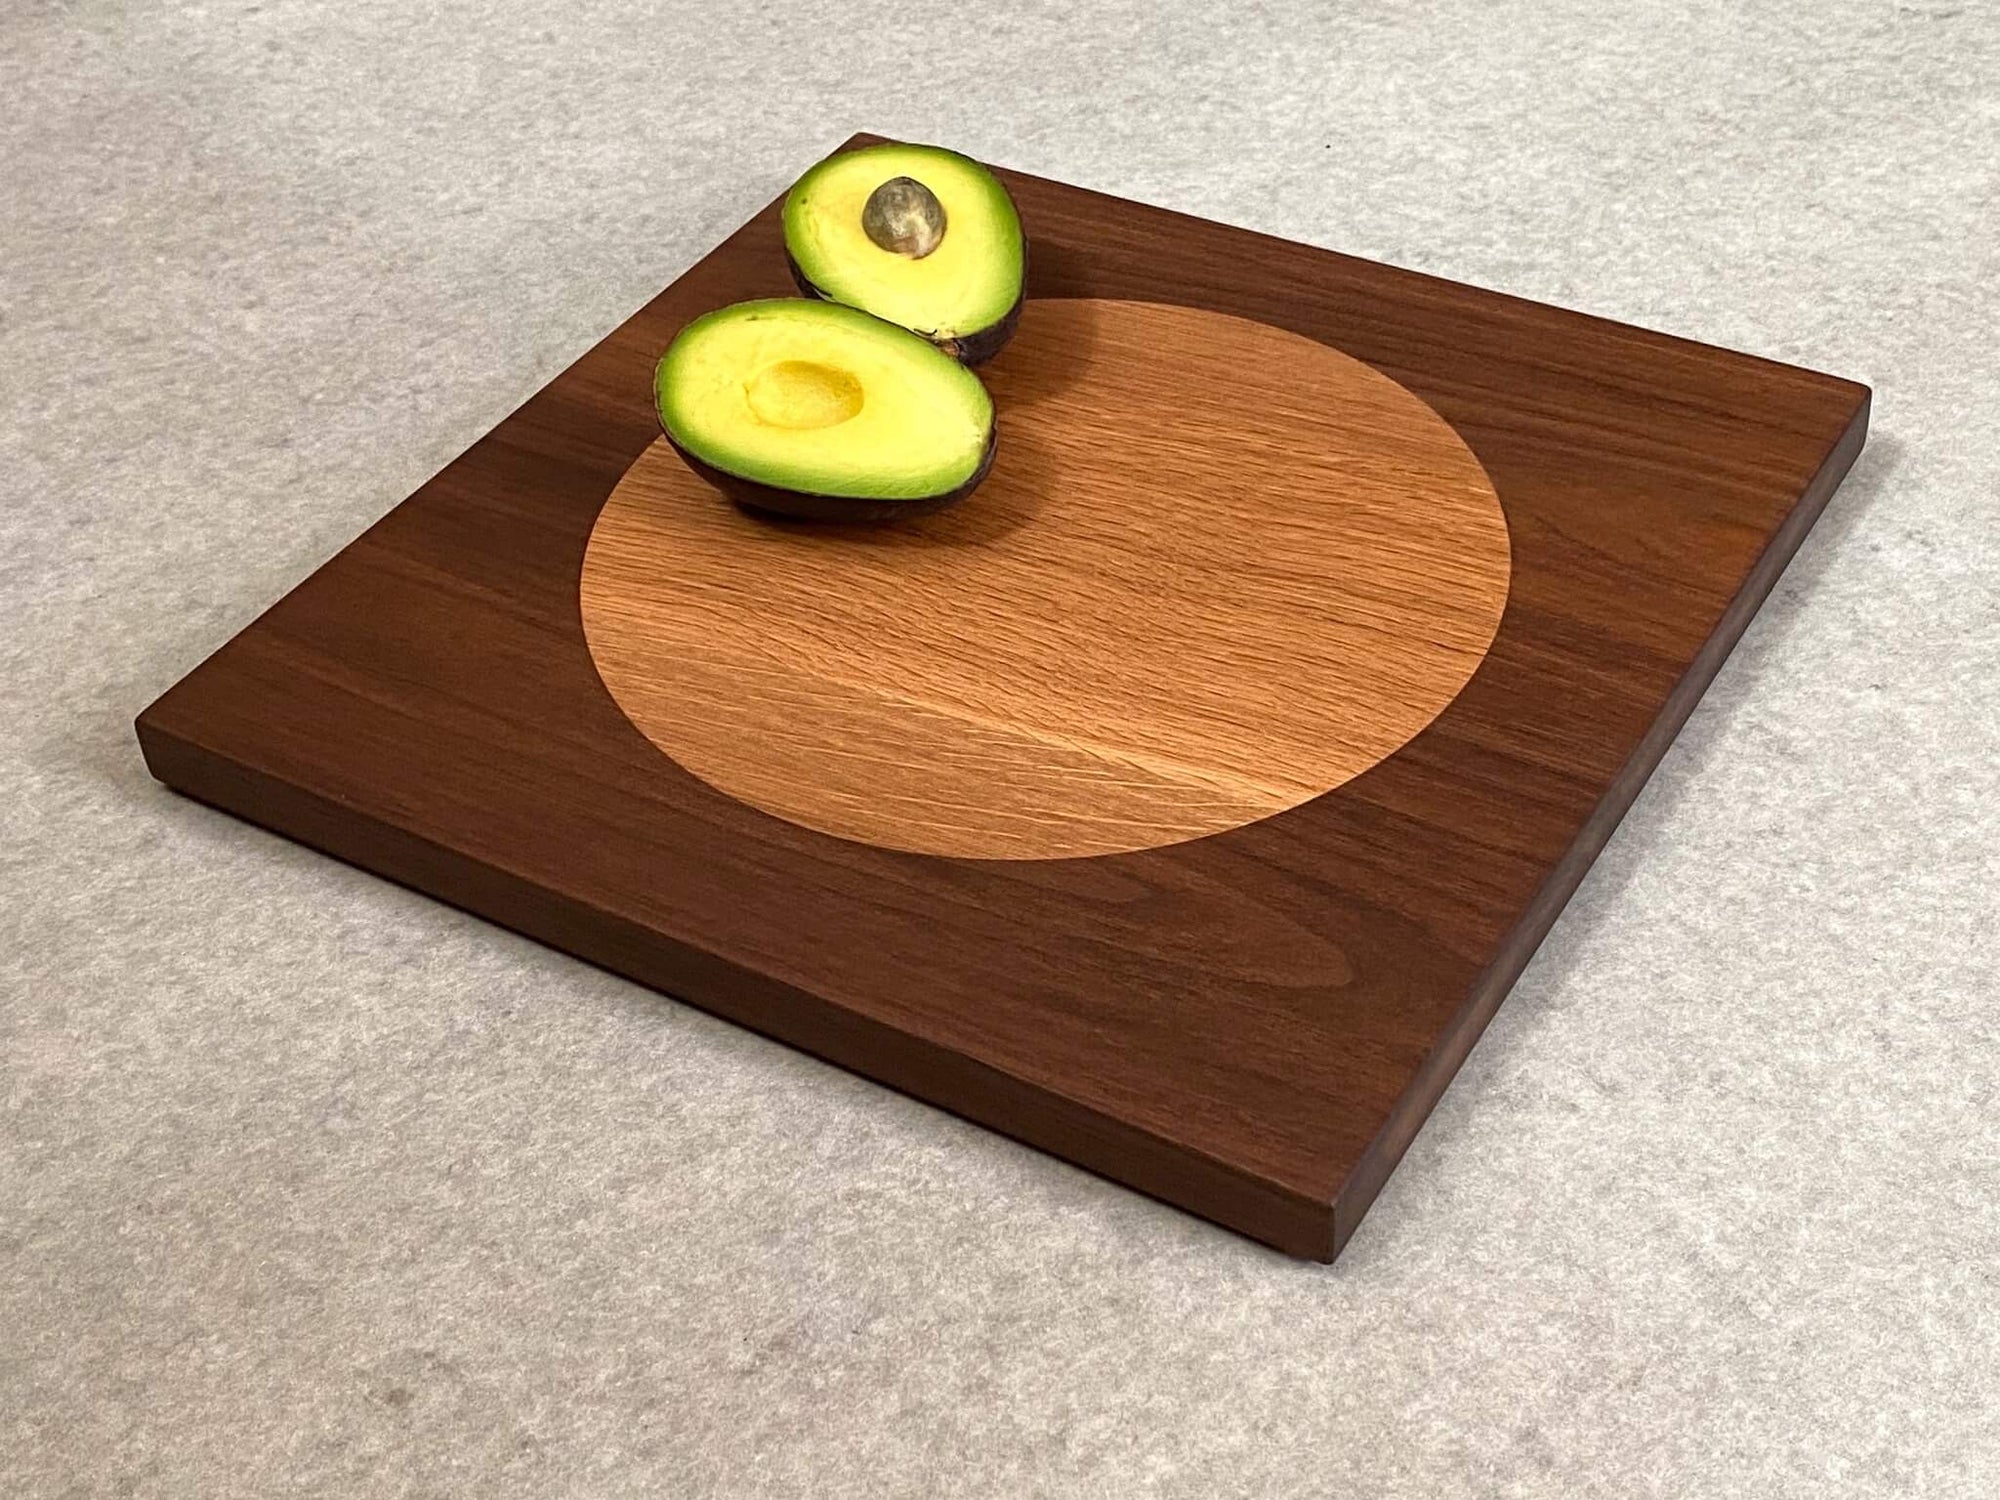 Square cutting board in walnut with large inlaid disc of white oak.